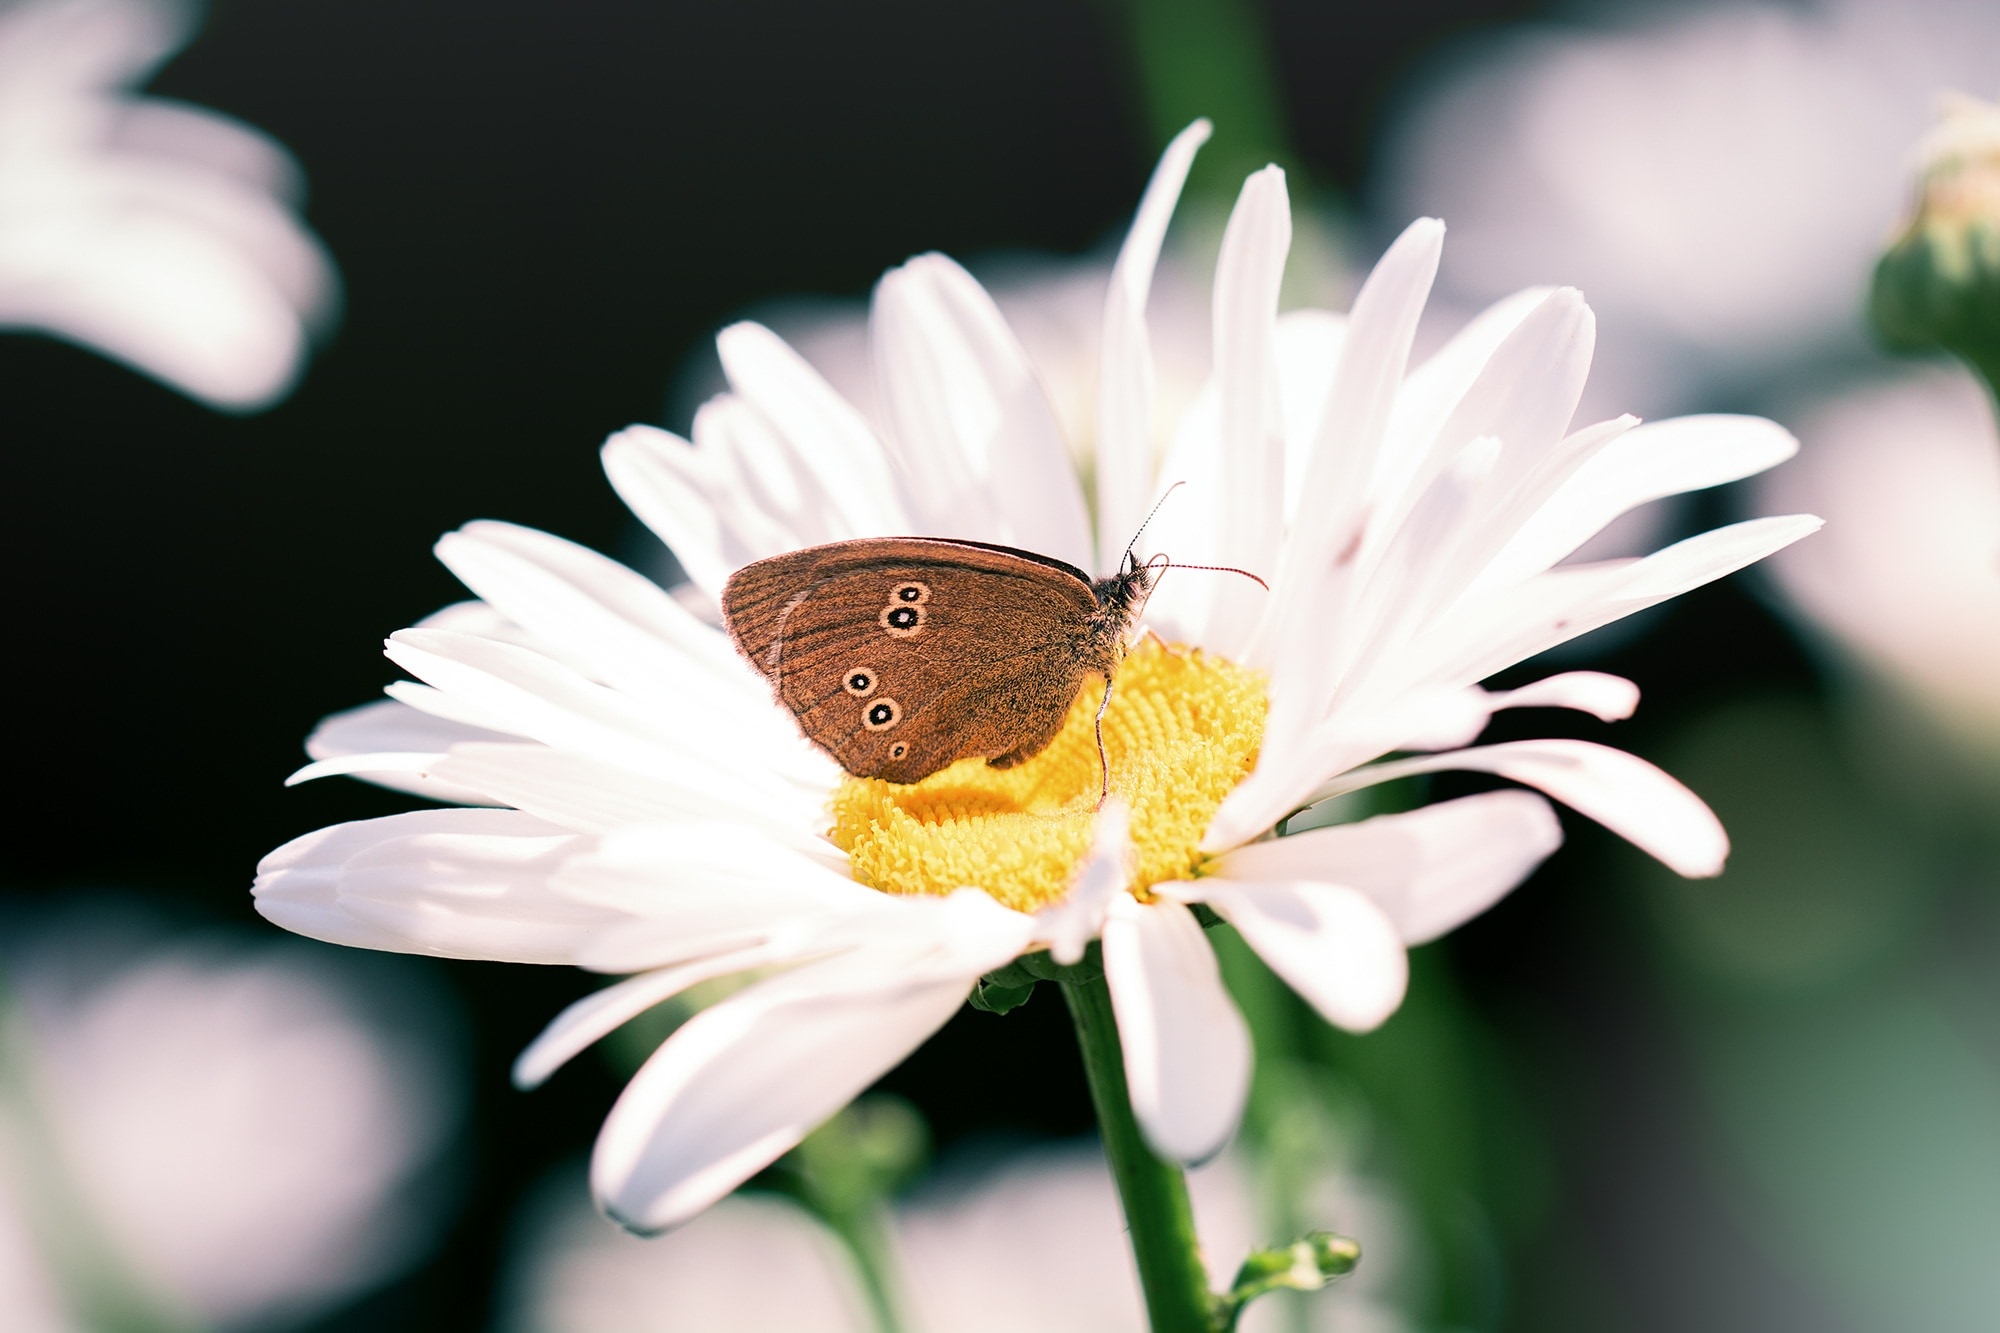 gatekeeper butterfly and white daisy flower